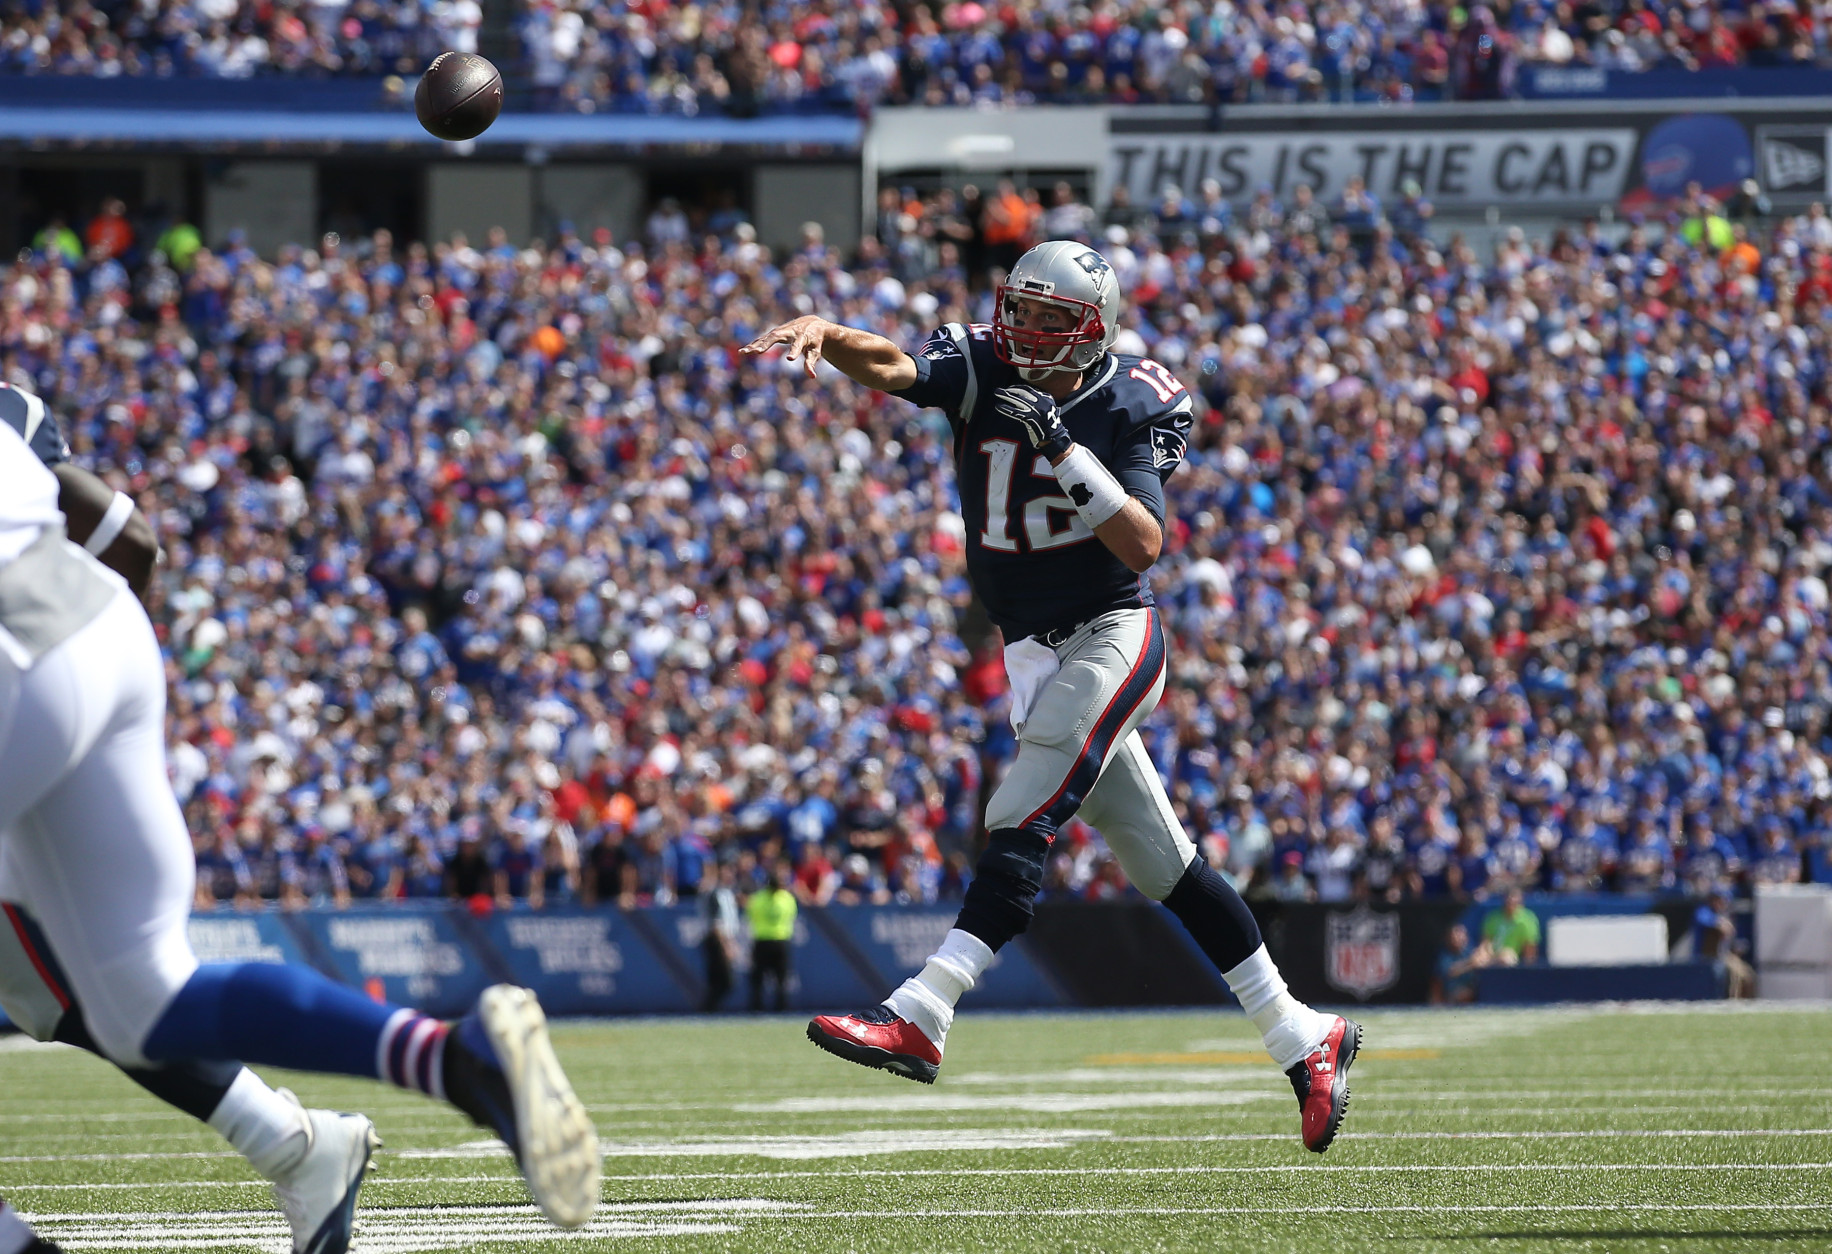 ORCHARD PARK, NY - SEPTEMBER 20: Tom Brady #12 of the New England Patriots throws a touchdown pass during NFL game action against the Buffalo Bills at Ralph Wilson Stadium on September 20, 2015 in Orchard Park, New York. (Photo by Tom Szczerbowski/Getty Images)